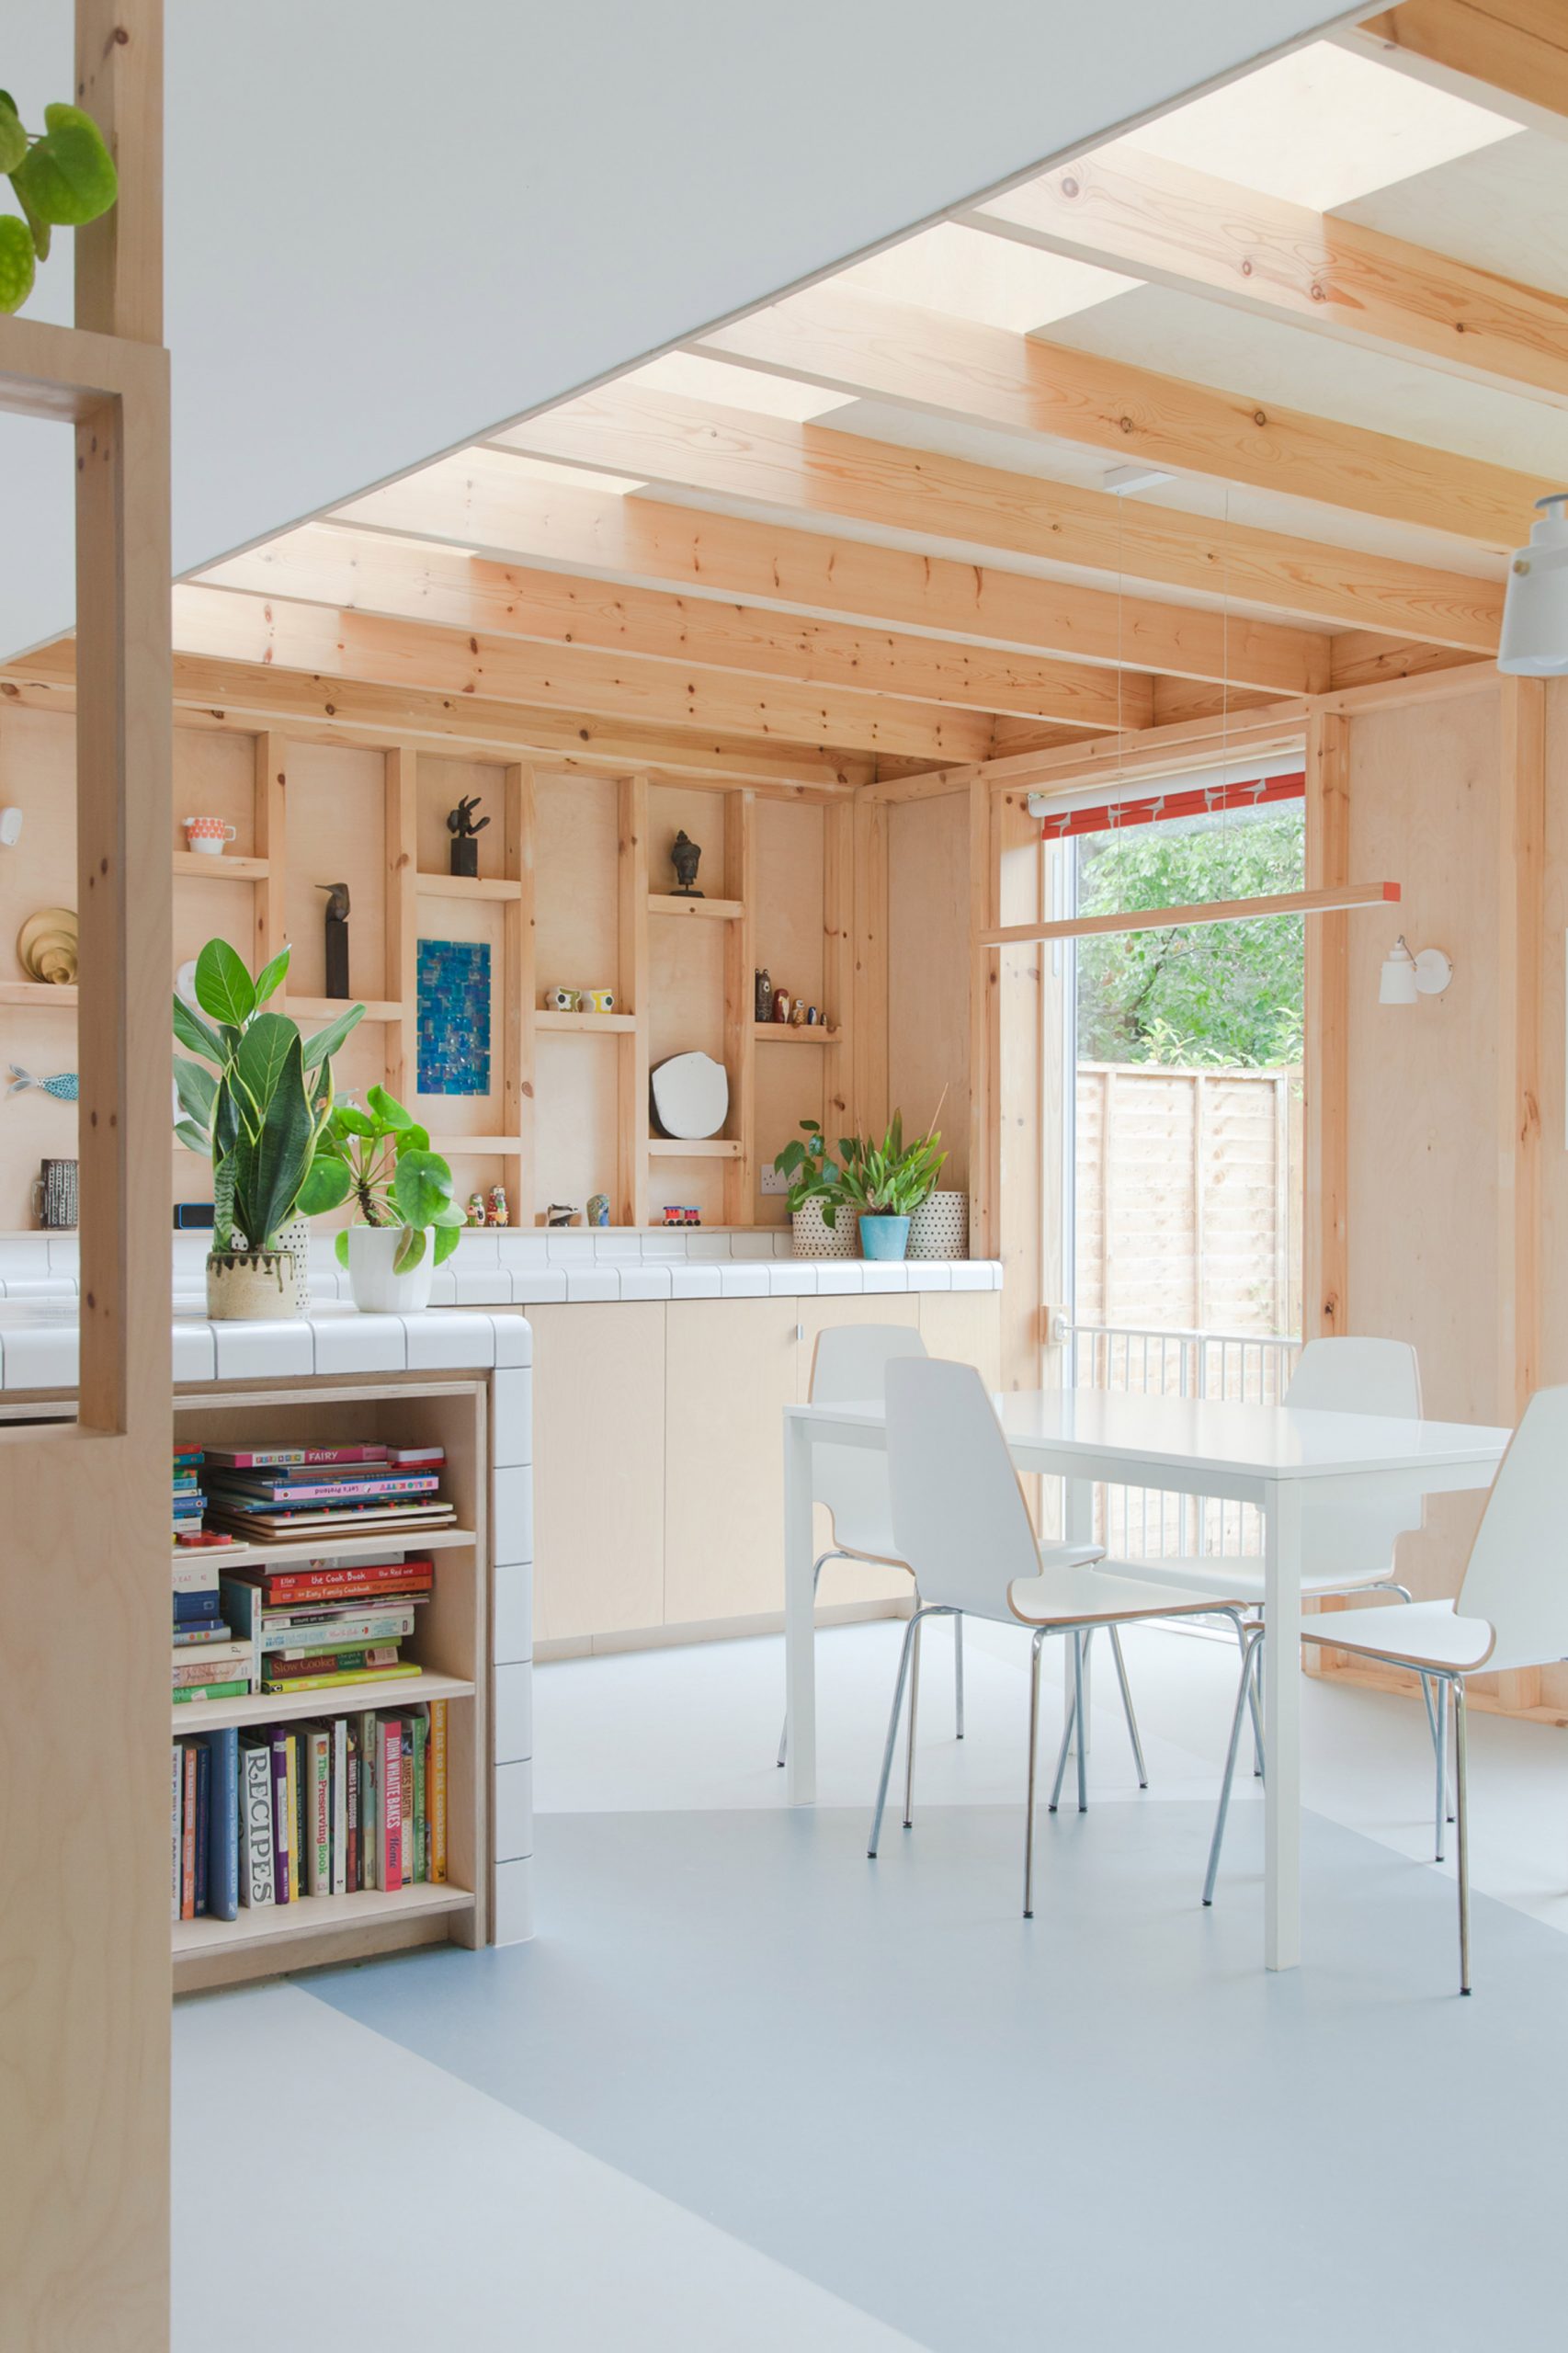 A kitchen with an exposed wooden structure